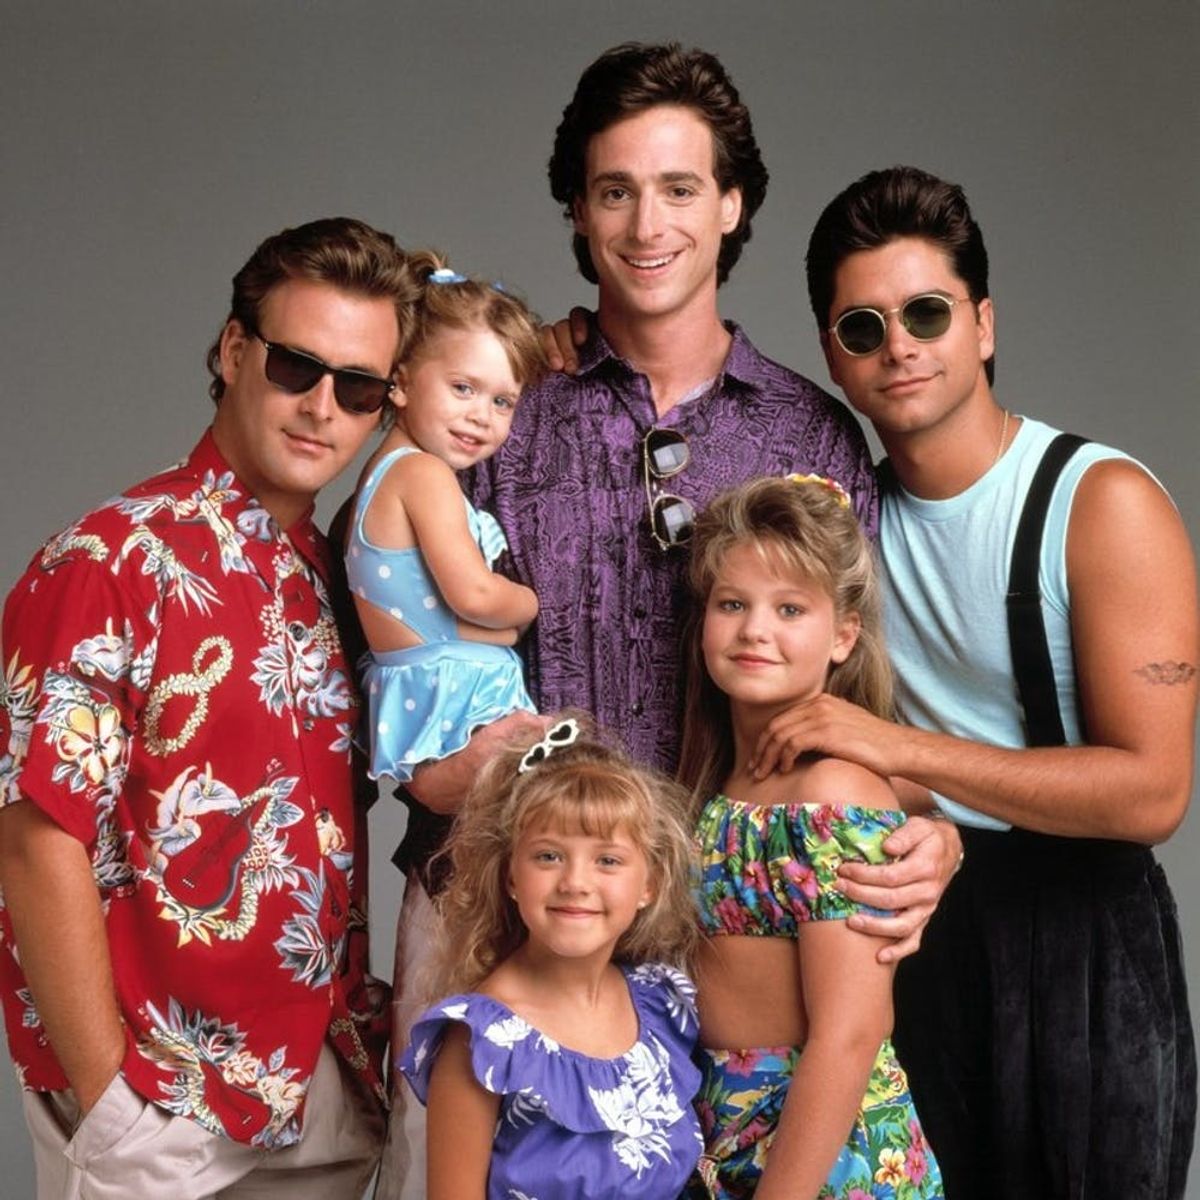 Snag the ENTIRE Full House Series Just in Time for the Holidays